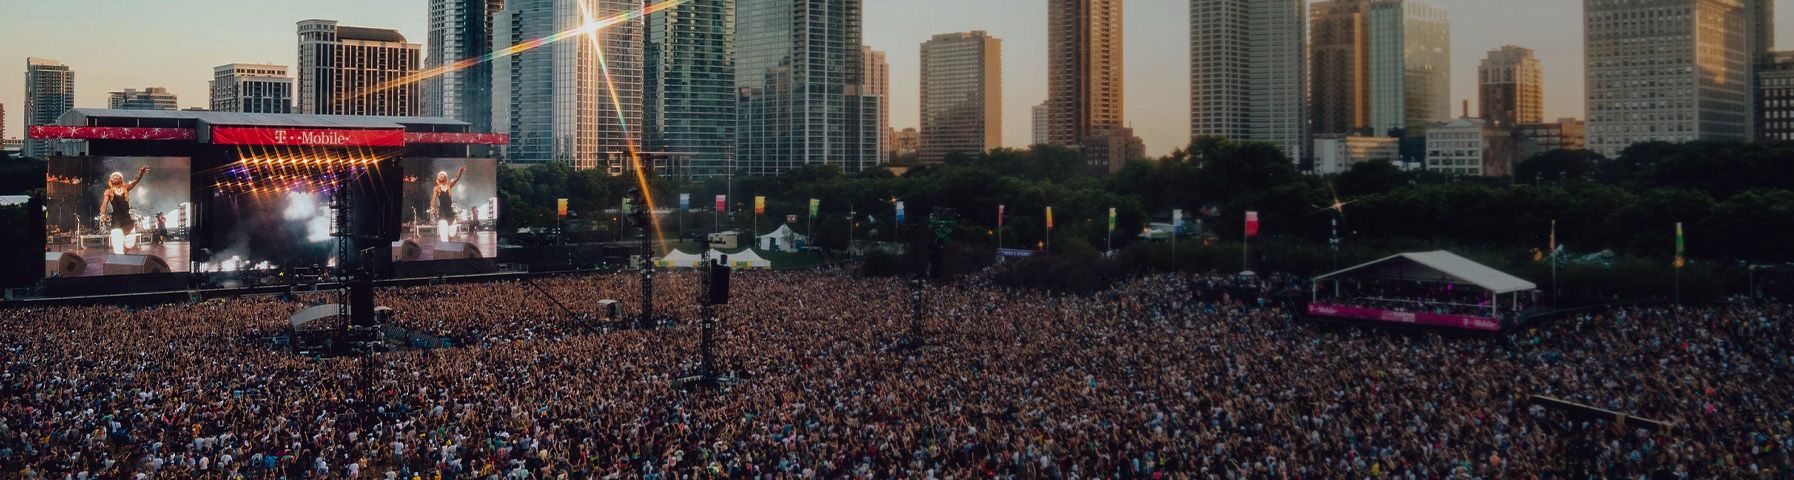 A large crowd at a music festival.